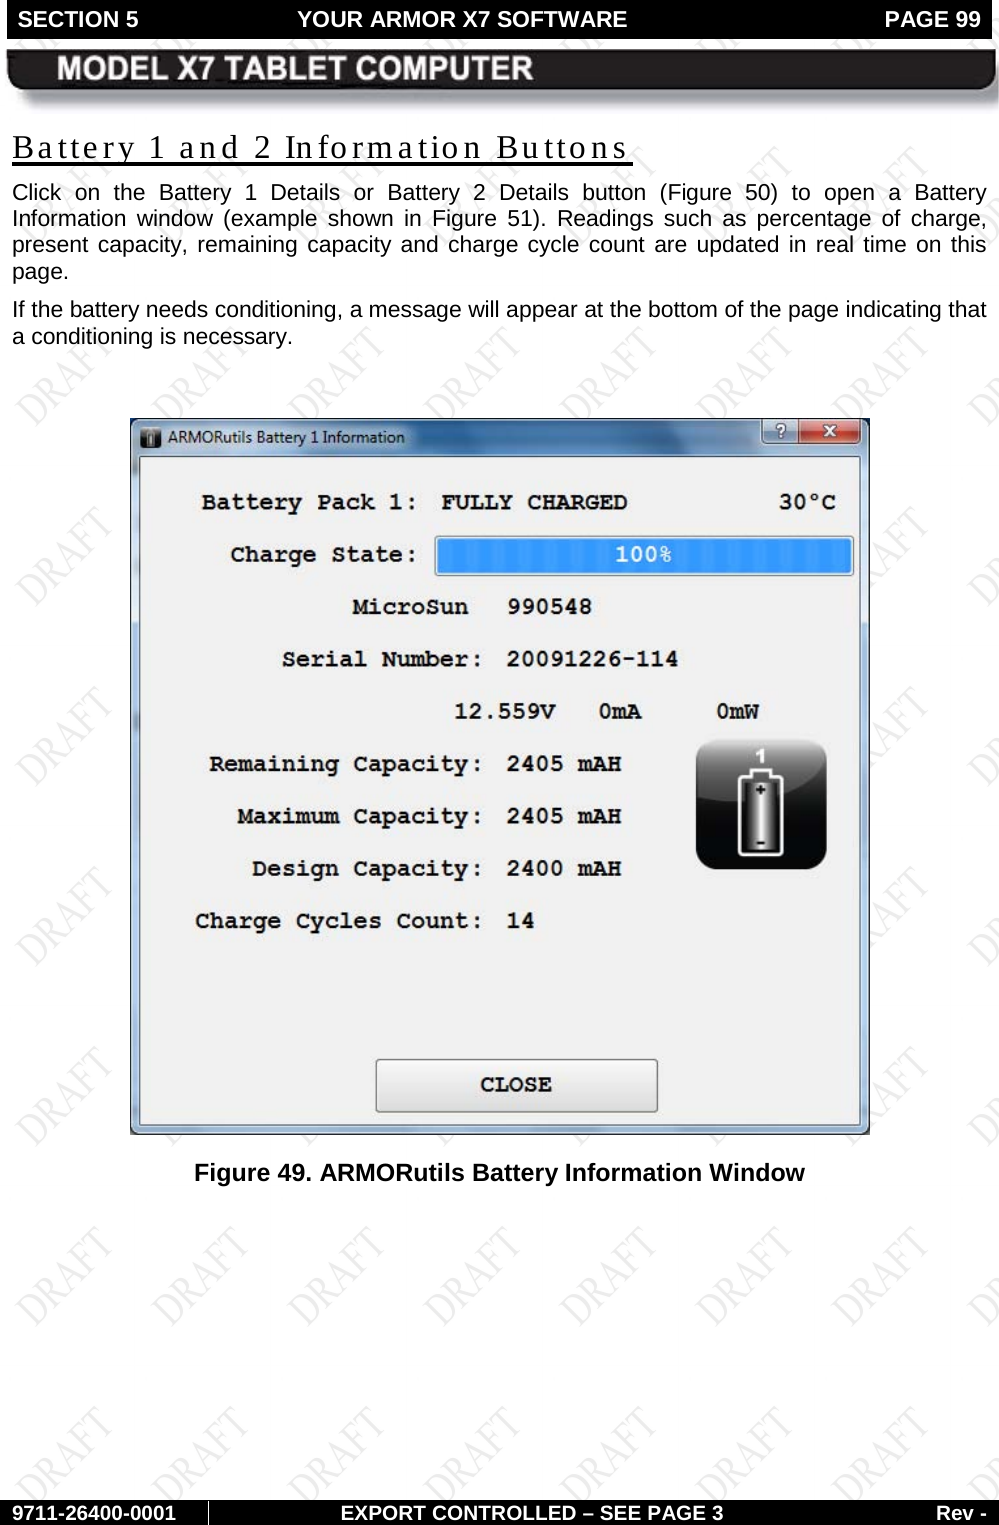 SECTION 5 YOUR ARMOR X7 SOFTWARE  PAGE 99        9711-26400-0001 EXPORT CONTROLLED – SEE PAGE 3 Rev - Battery 1 and 2 Information Buttons Click on the Battery 1 Details or Battery 2 Details button (Figure 50) to open a Battery Information window (example shown in Figure 51). Readings such as percentage of charge, present capacity, remaining capacity and charge cycle count are updated in real time on this page. If the battery needs conditioning, a message will appear at the bottom of the page indicating that a conditioning is necessary.   Figure 49. ARMORutils Battery Information Window   